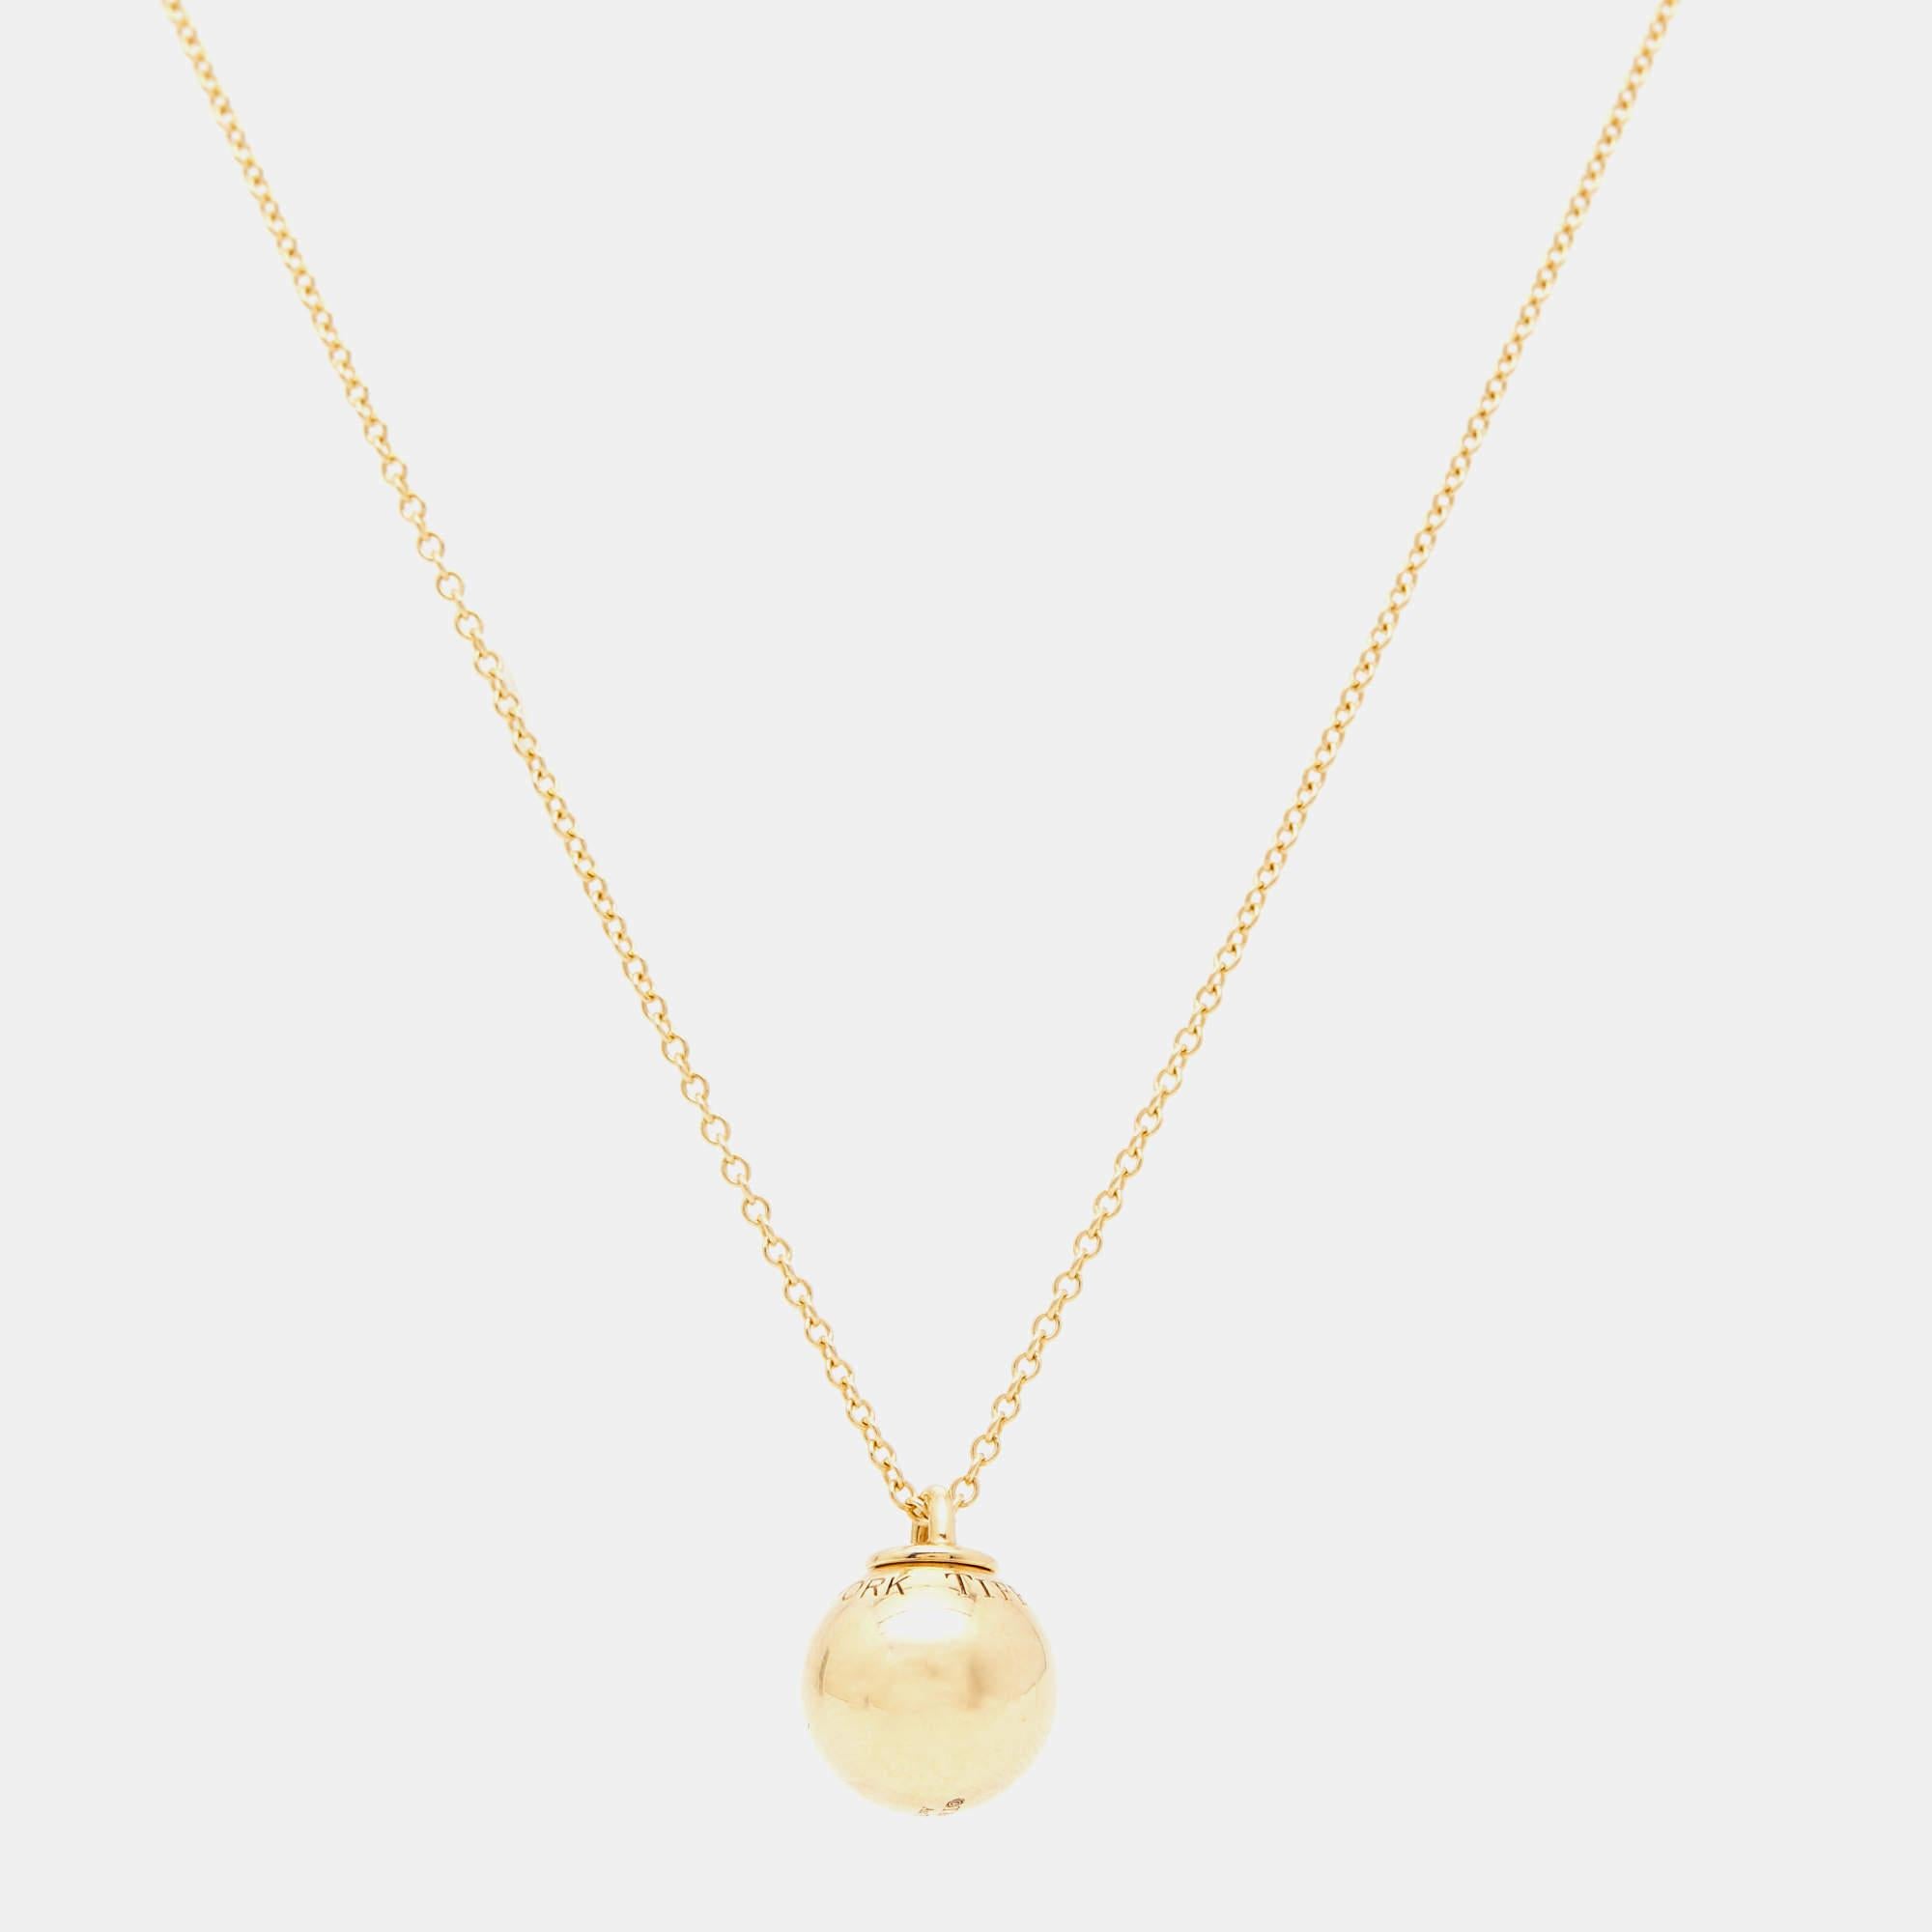 The Tiffany & Co. HardWear Ball necklace exudes modern elegance. Crafted from lustrous 18k yellow gold, the design features a bead pendant, creating a bold yet refined statement piece. Versatile and timeless, it seamlessly transitions from day to